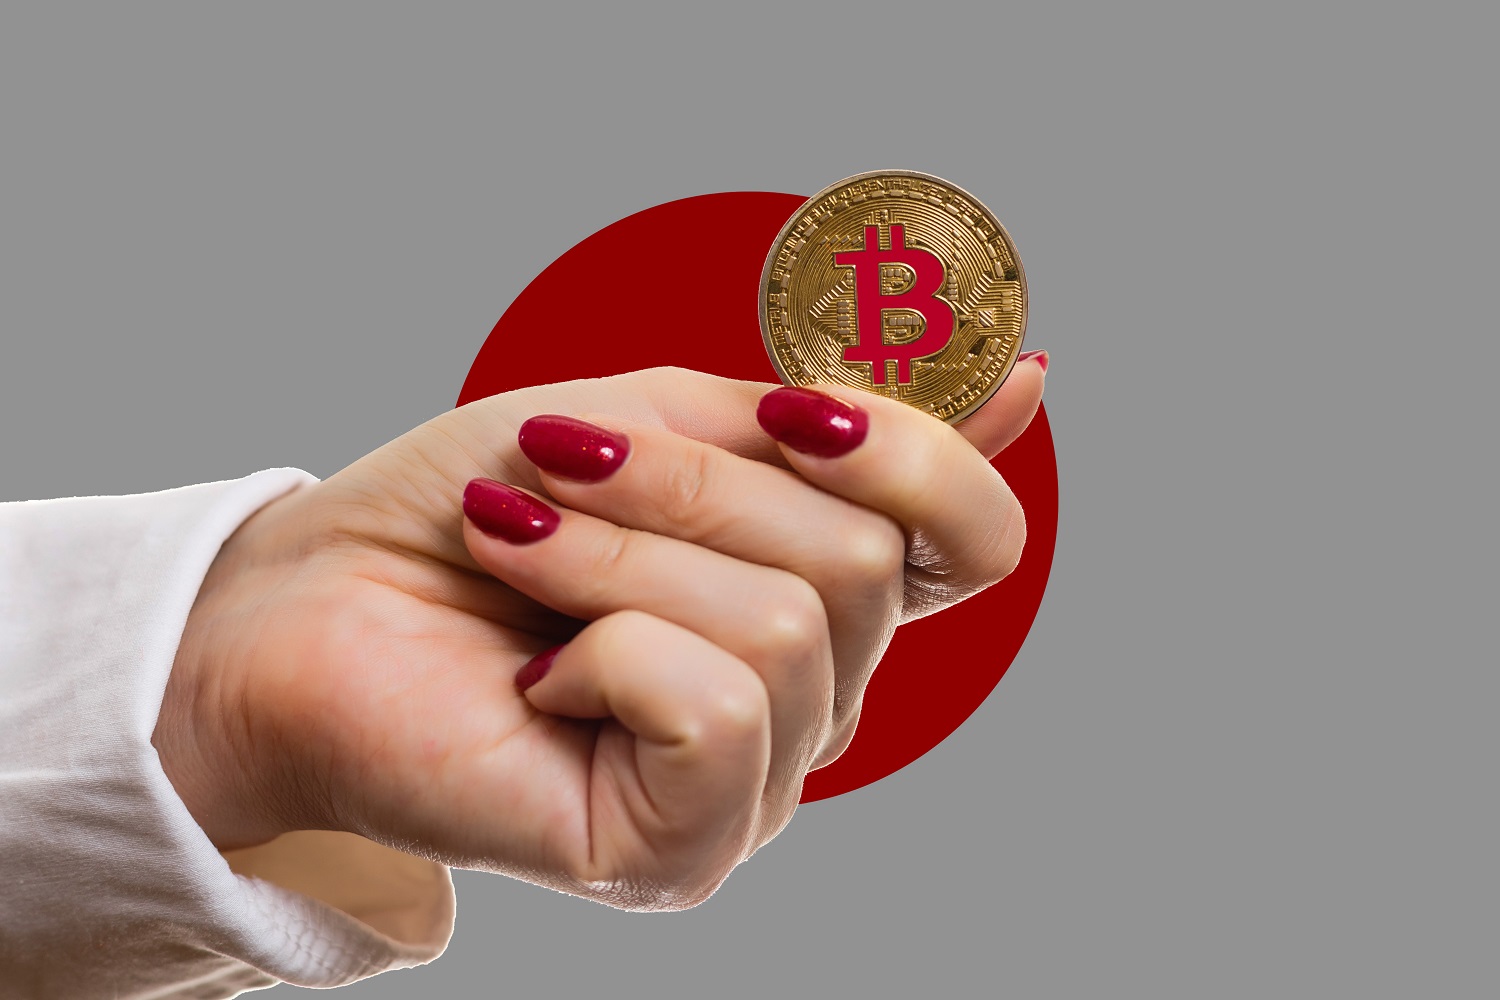 A woman’s hand holds a token intended to represent Bitcoin against the background of the flag of Japan.